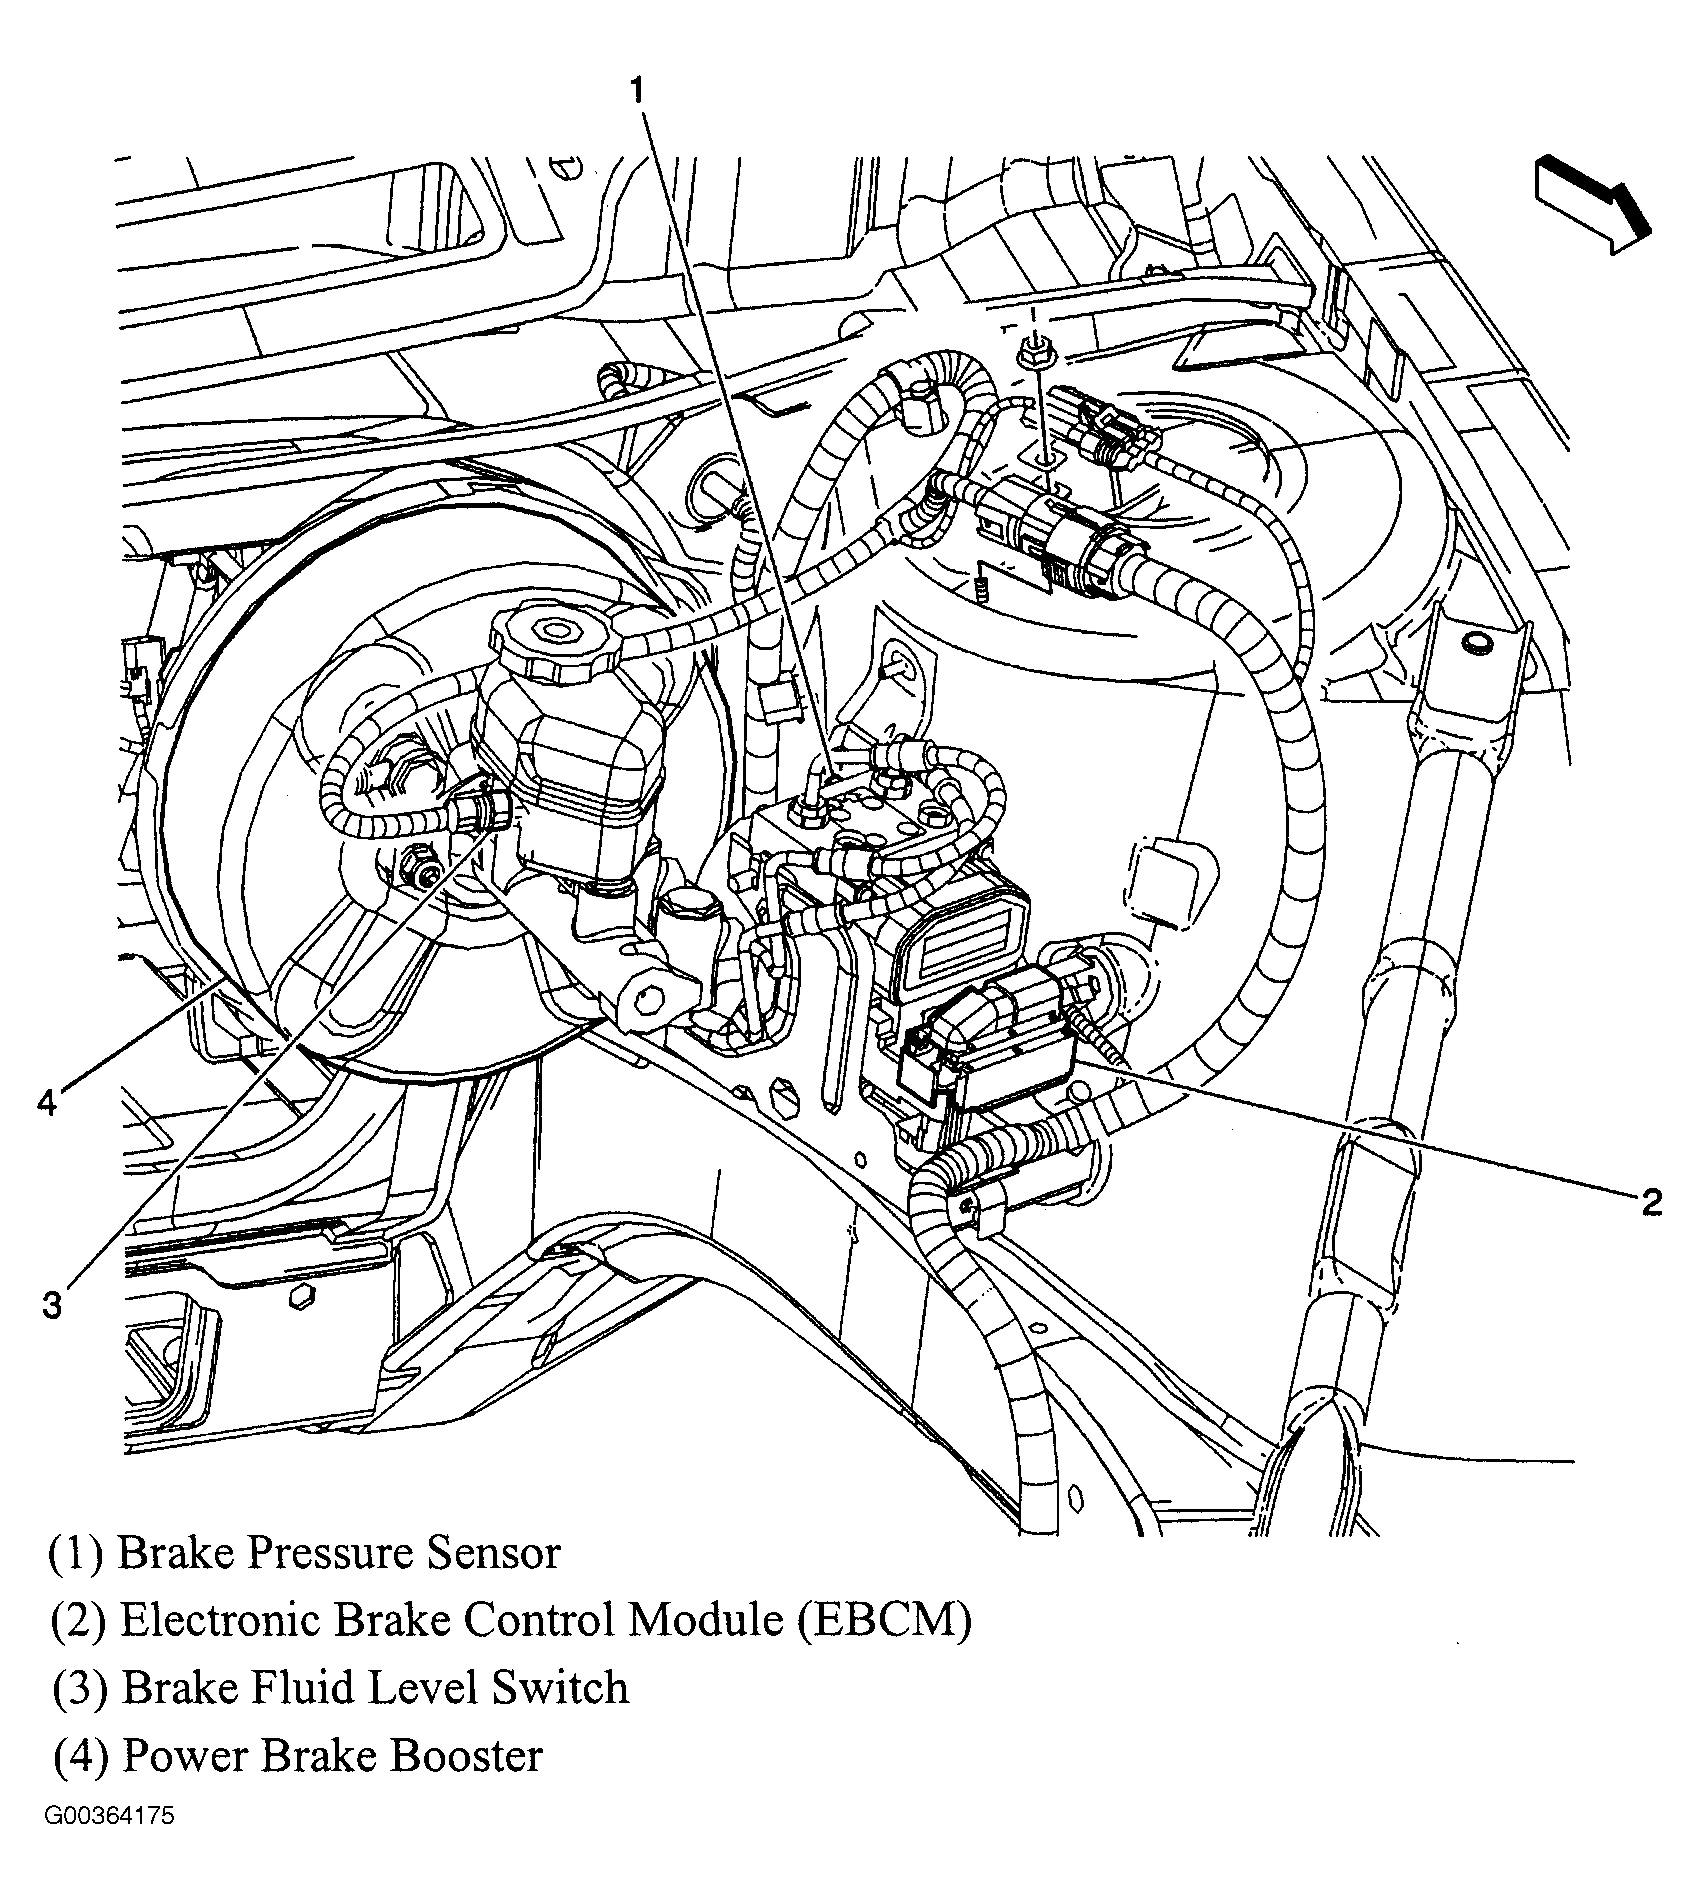 Buick Allure CXL 2005 - Component Locations -  Left Rear Of Engine Compartment